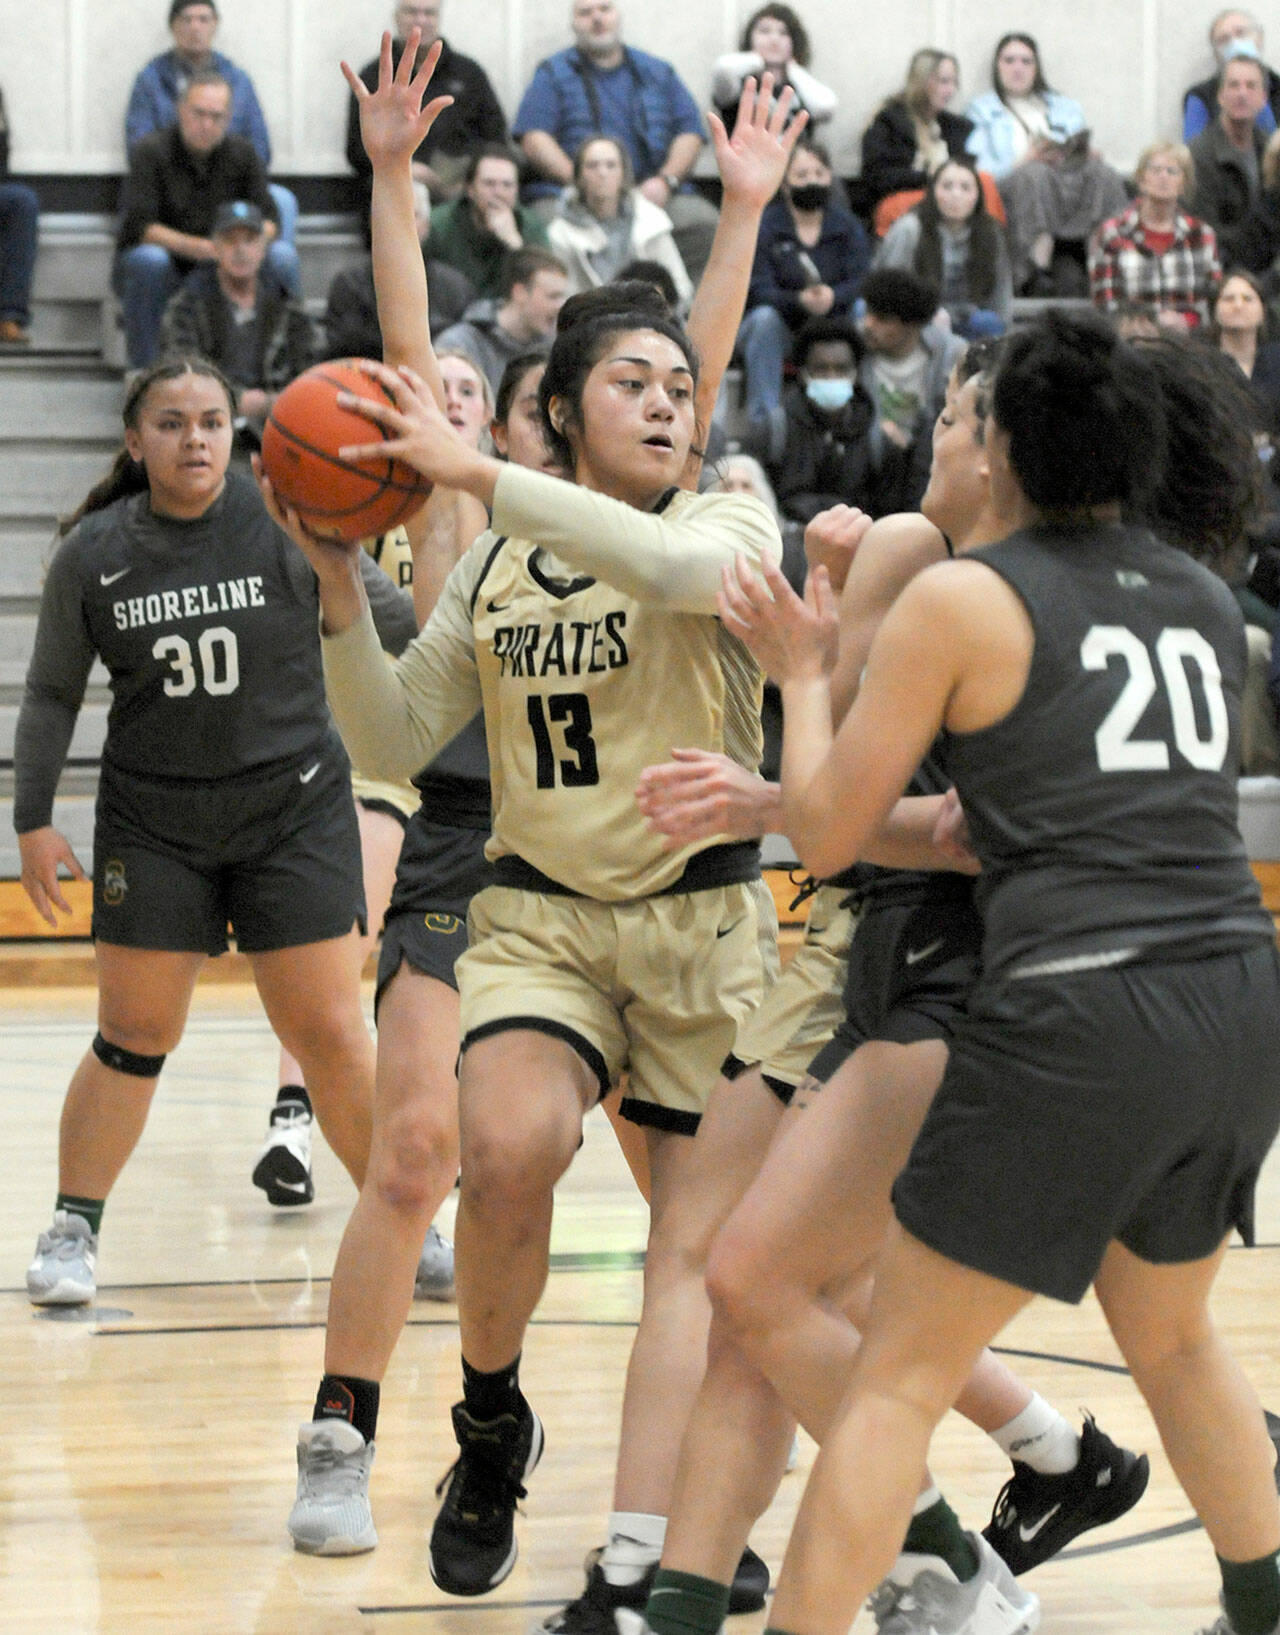 Peninsula’s Ituau Tuisaula, center, looks to pass surrounded by Shoreline defenders, including, from left, Leiah Naeata, Taylor Eldredge and Moemanogi Notoa on Saturday in Port Angeles. (Keith Thorpe/Peninsula Daily News)